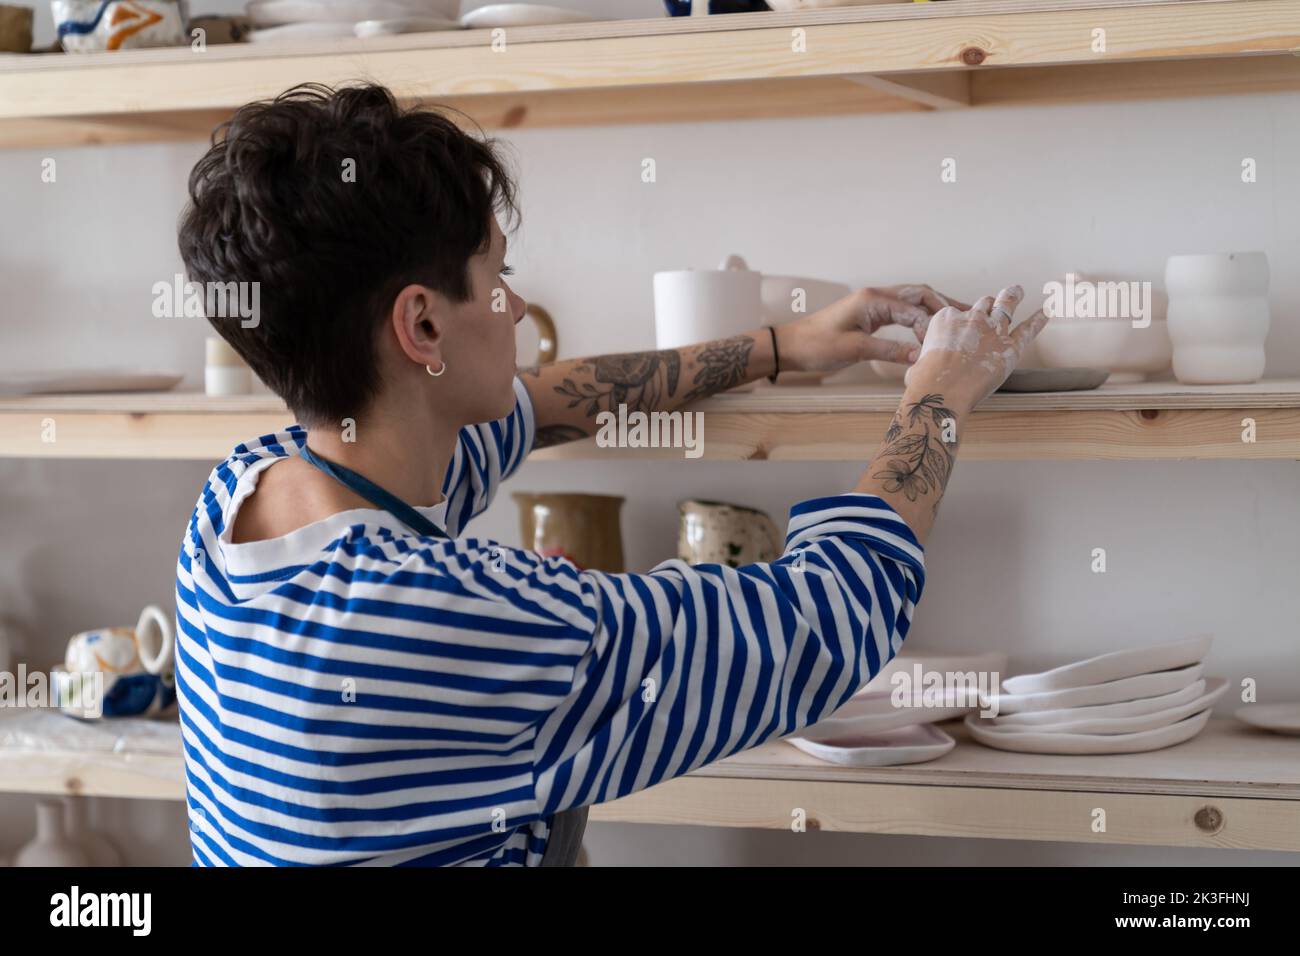 Successful ceramics studio owner arranges a showcase with finished products for sale Stock Photo